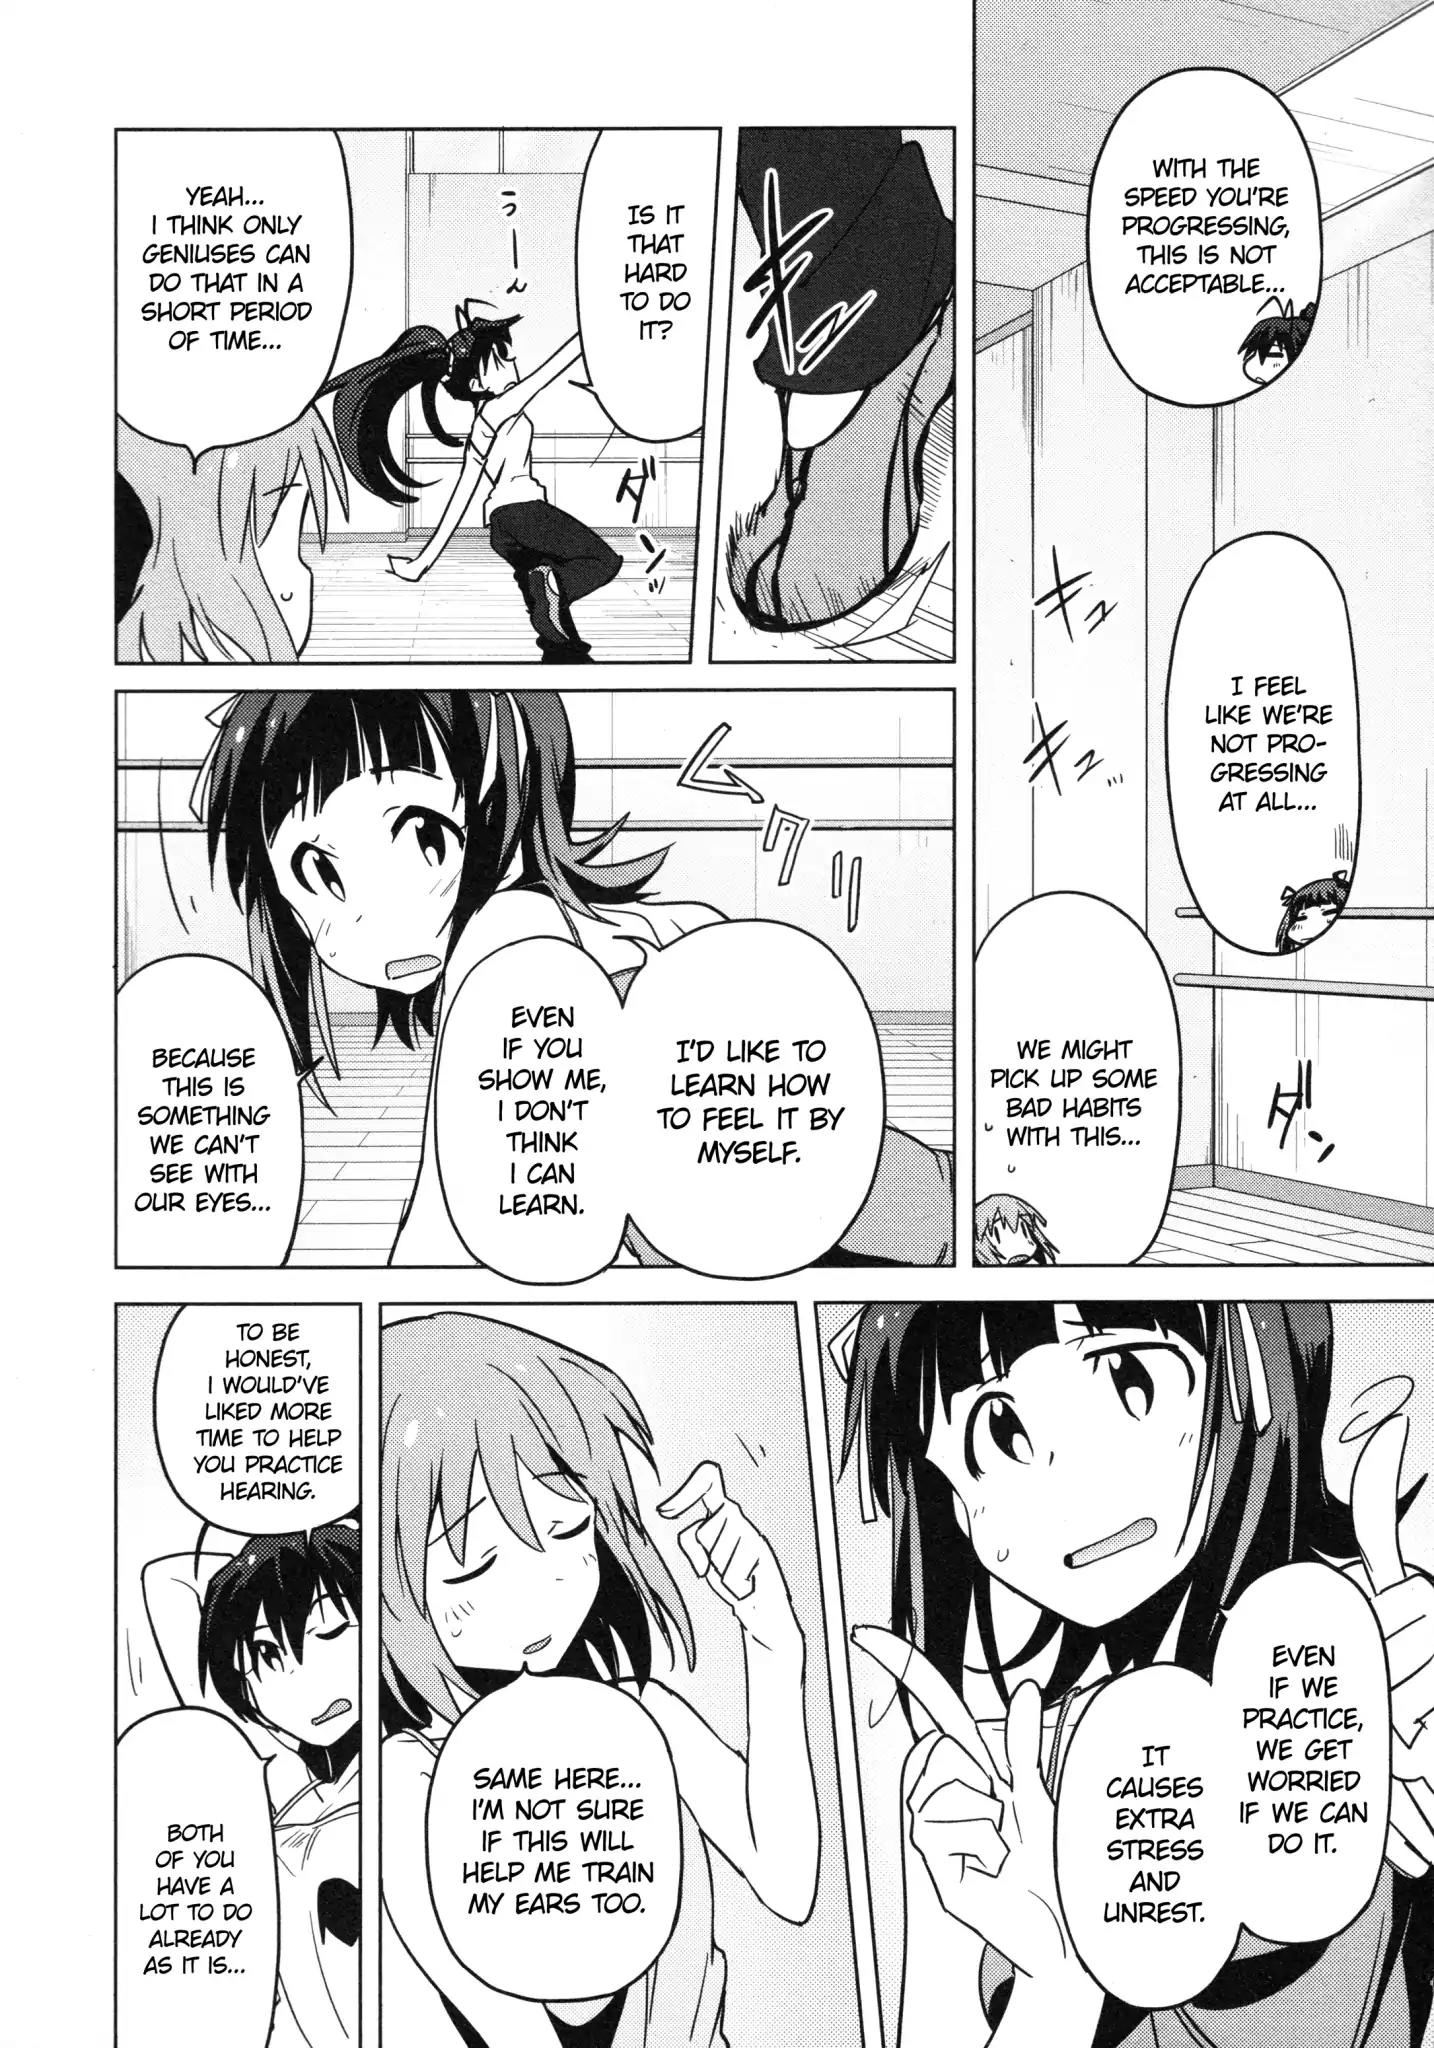 The iDOLM@STER 2: The World Is All One!! Vol.5 Chapter 29: Found It